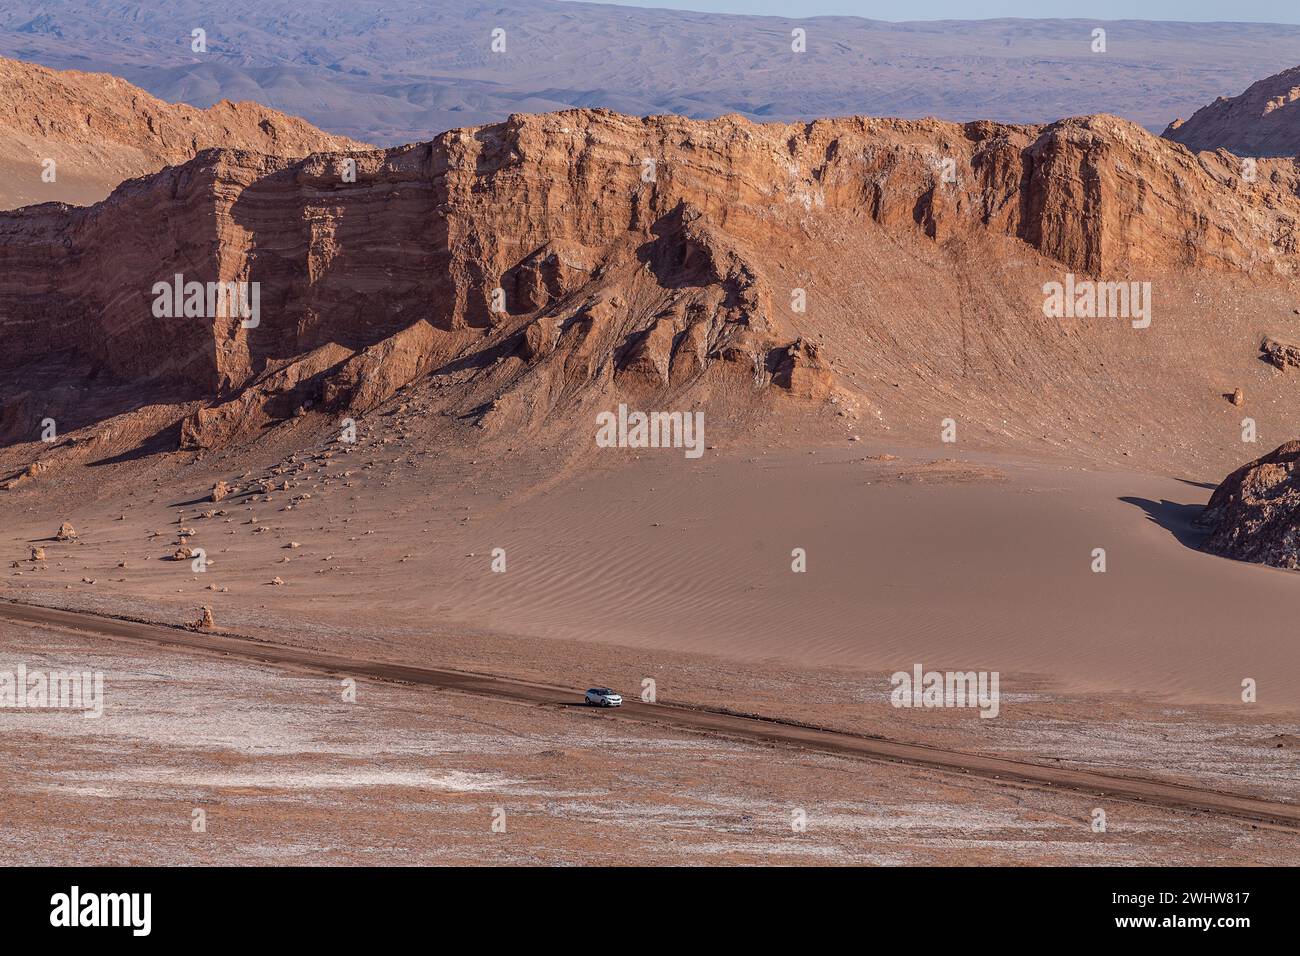 A bright red rock formations in the middle of the Valley of the Moon, Valle de la Luna, within the Atacama Desert in northern Chile. Stock Photo